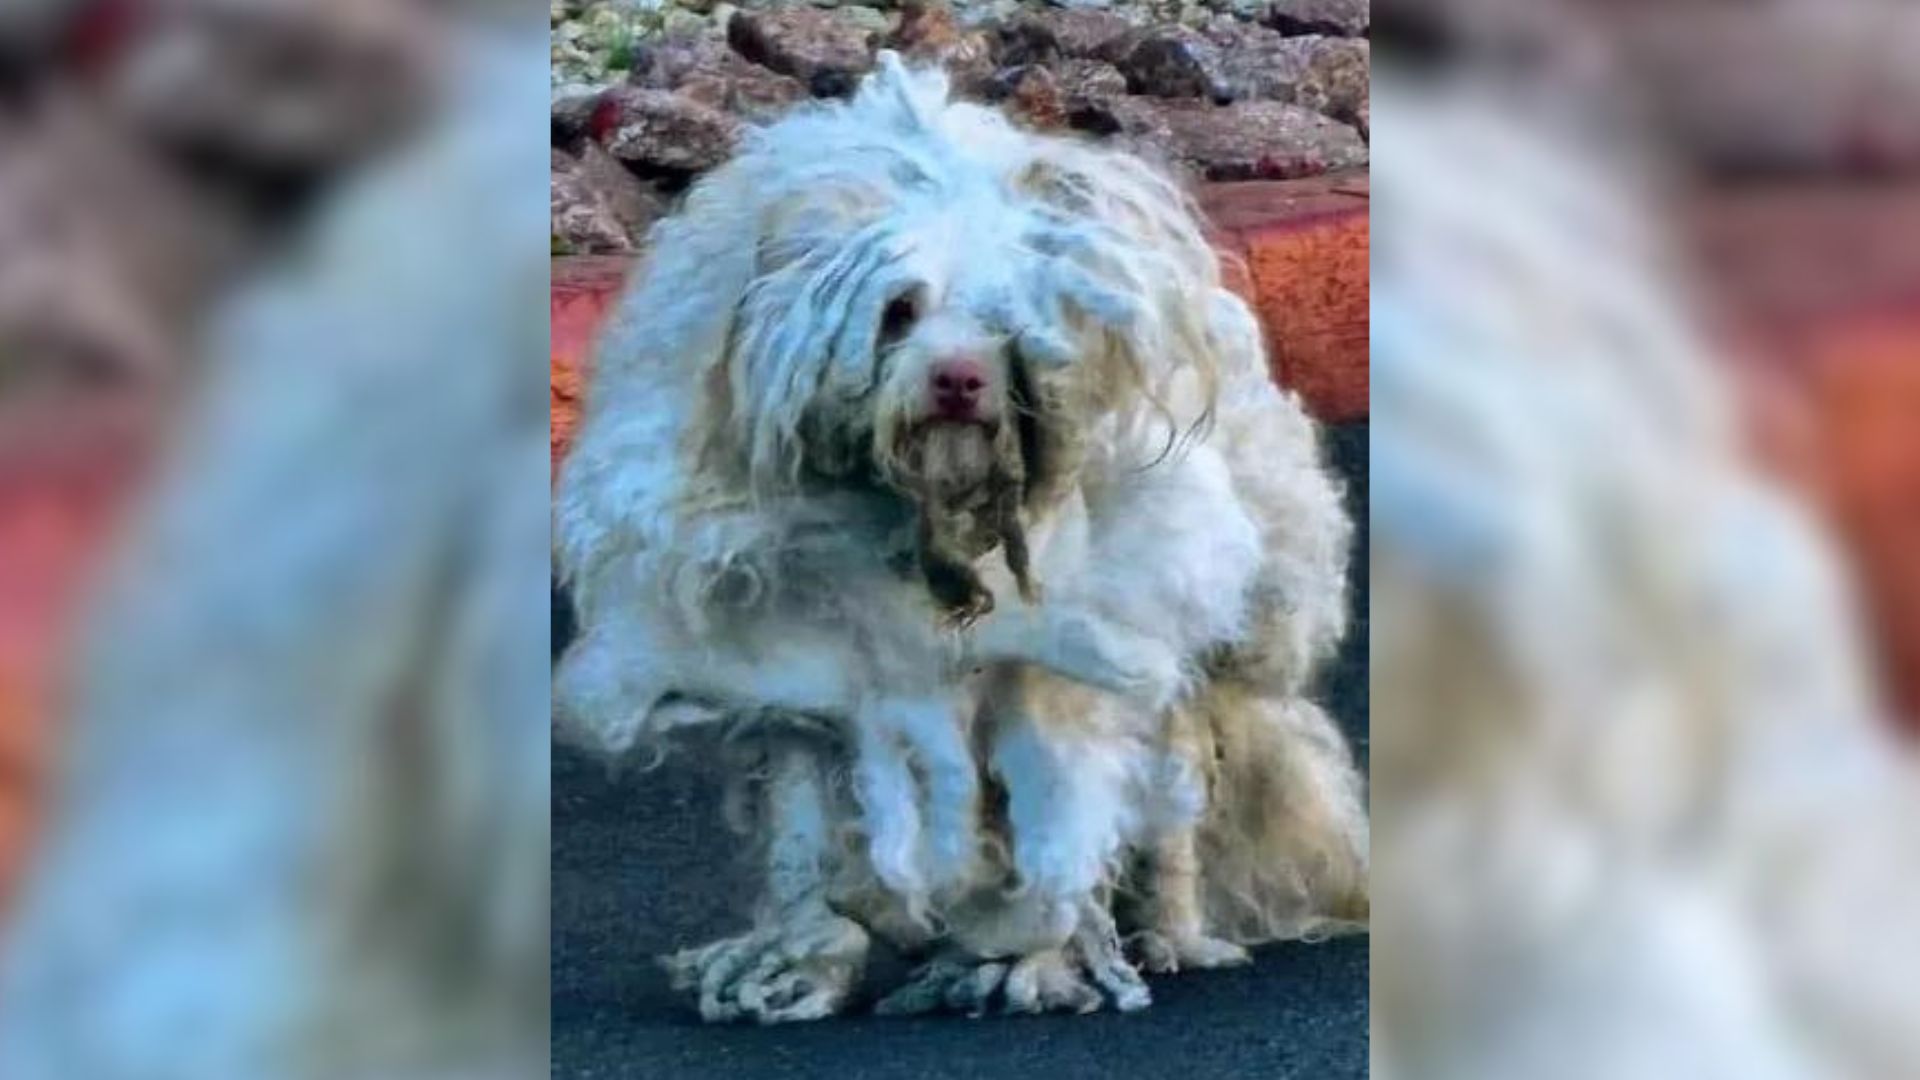 The Poor Dog Was So Badly Matted That The Vet Couldn’t Even Tell If He Had Two Eyes 